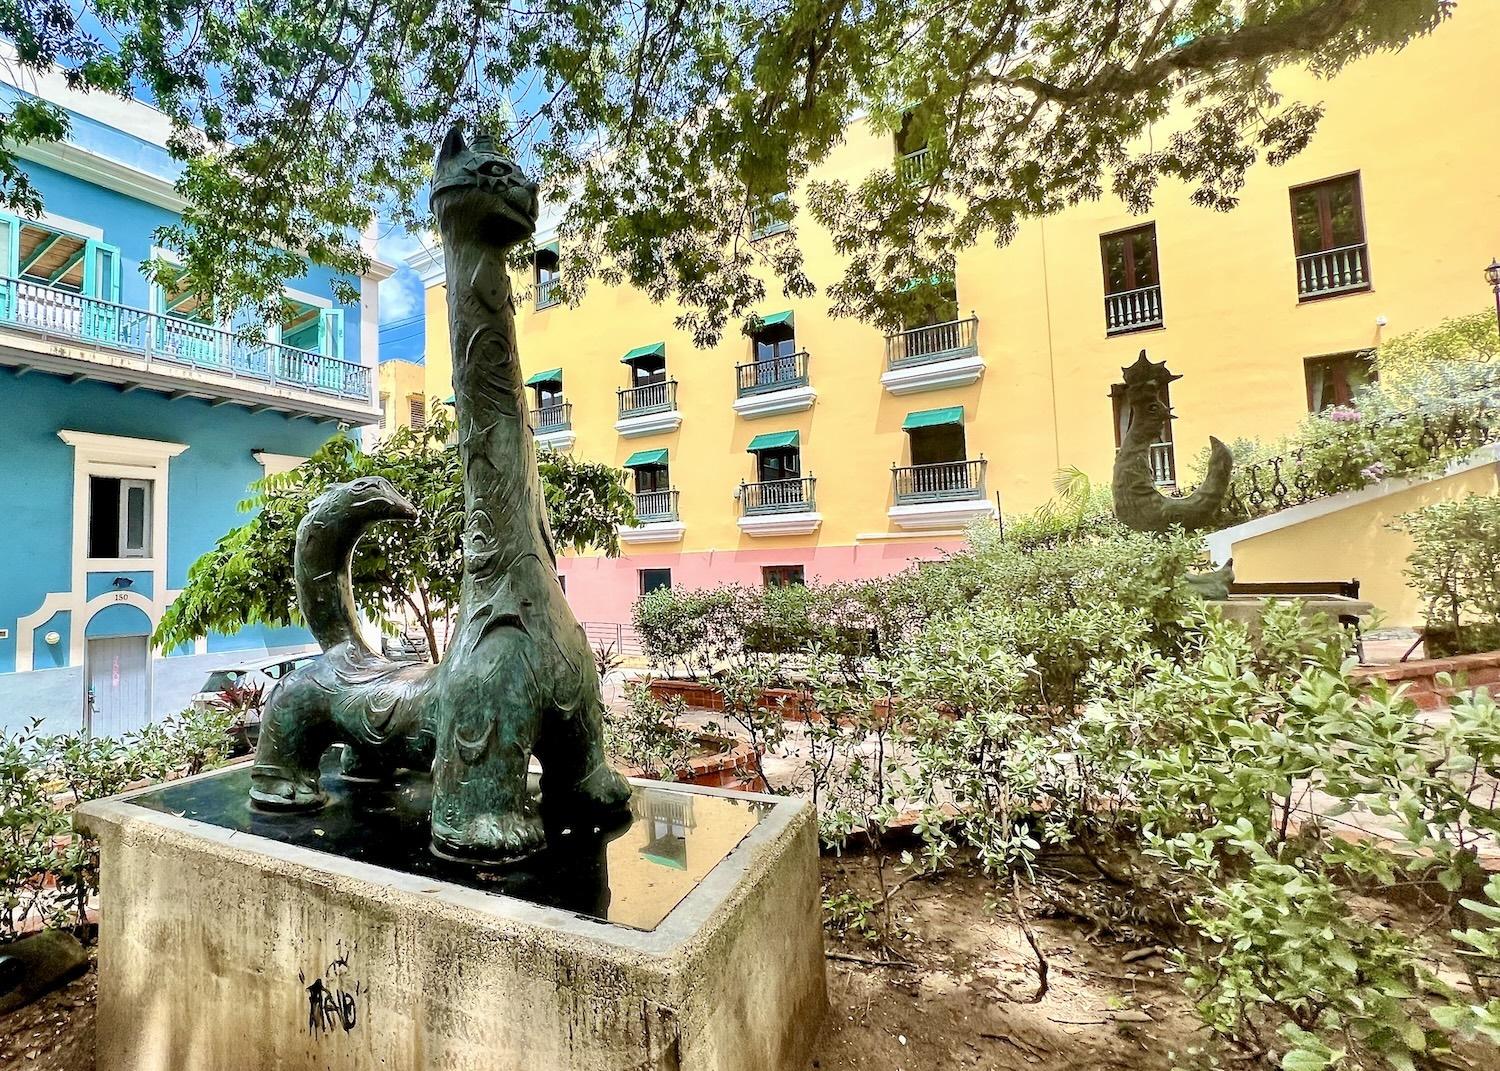 Gato Girafo, a 2000 bronze by Jorge Zeno, can be found in a small Old San Juan park not far from the San Juan Gate and Paseo del Morro where somewhere between 100 and 200 cats live.